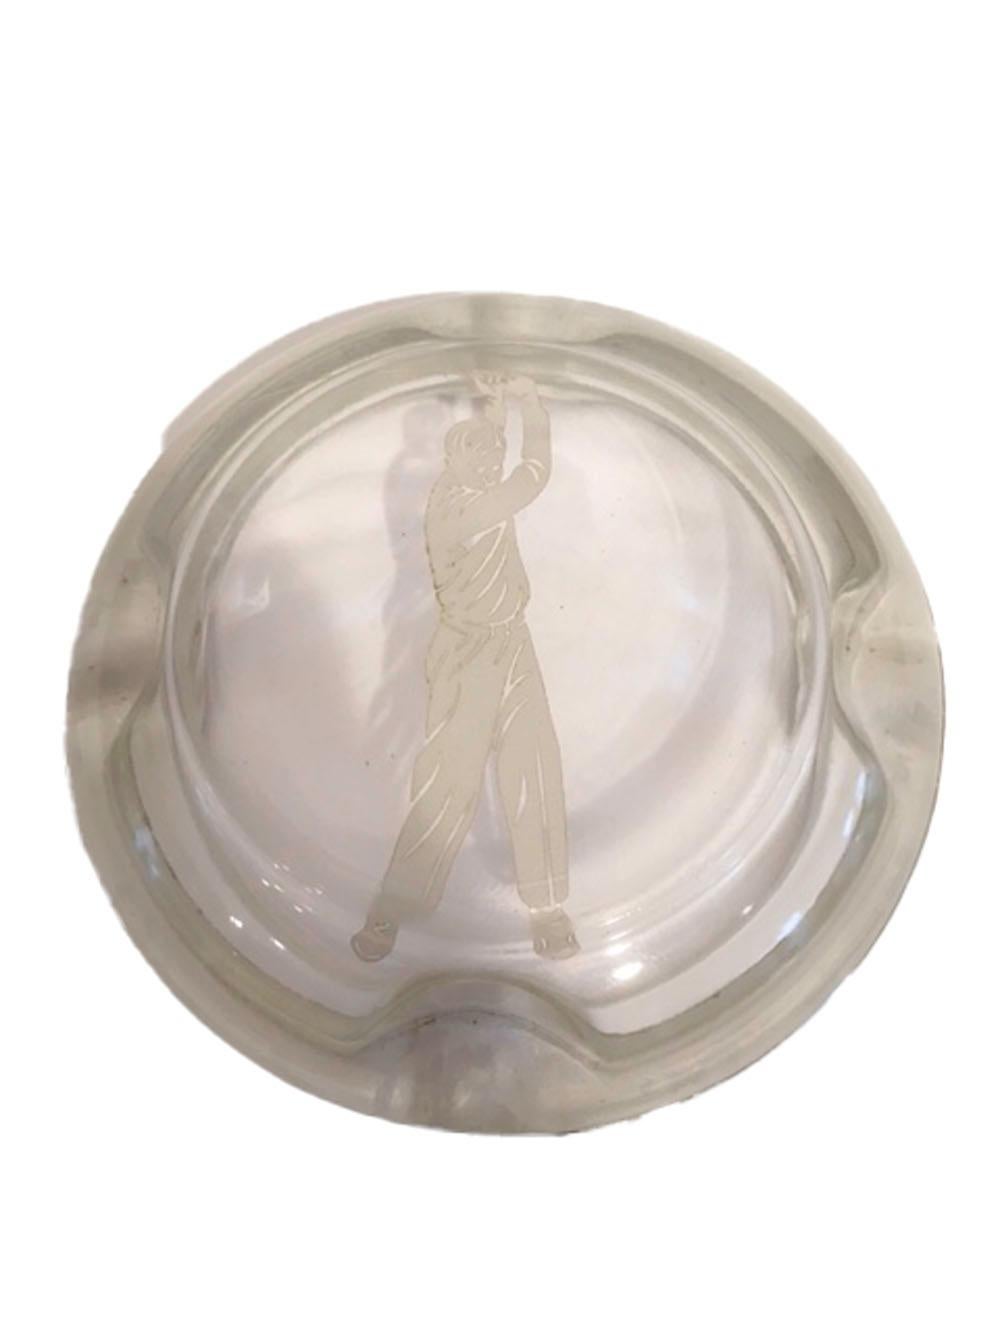 20th Century Art Deco Glass Ashtray with Sterling Overlay of a Golfer Swinging a Club